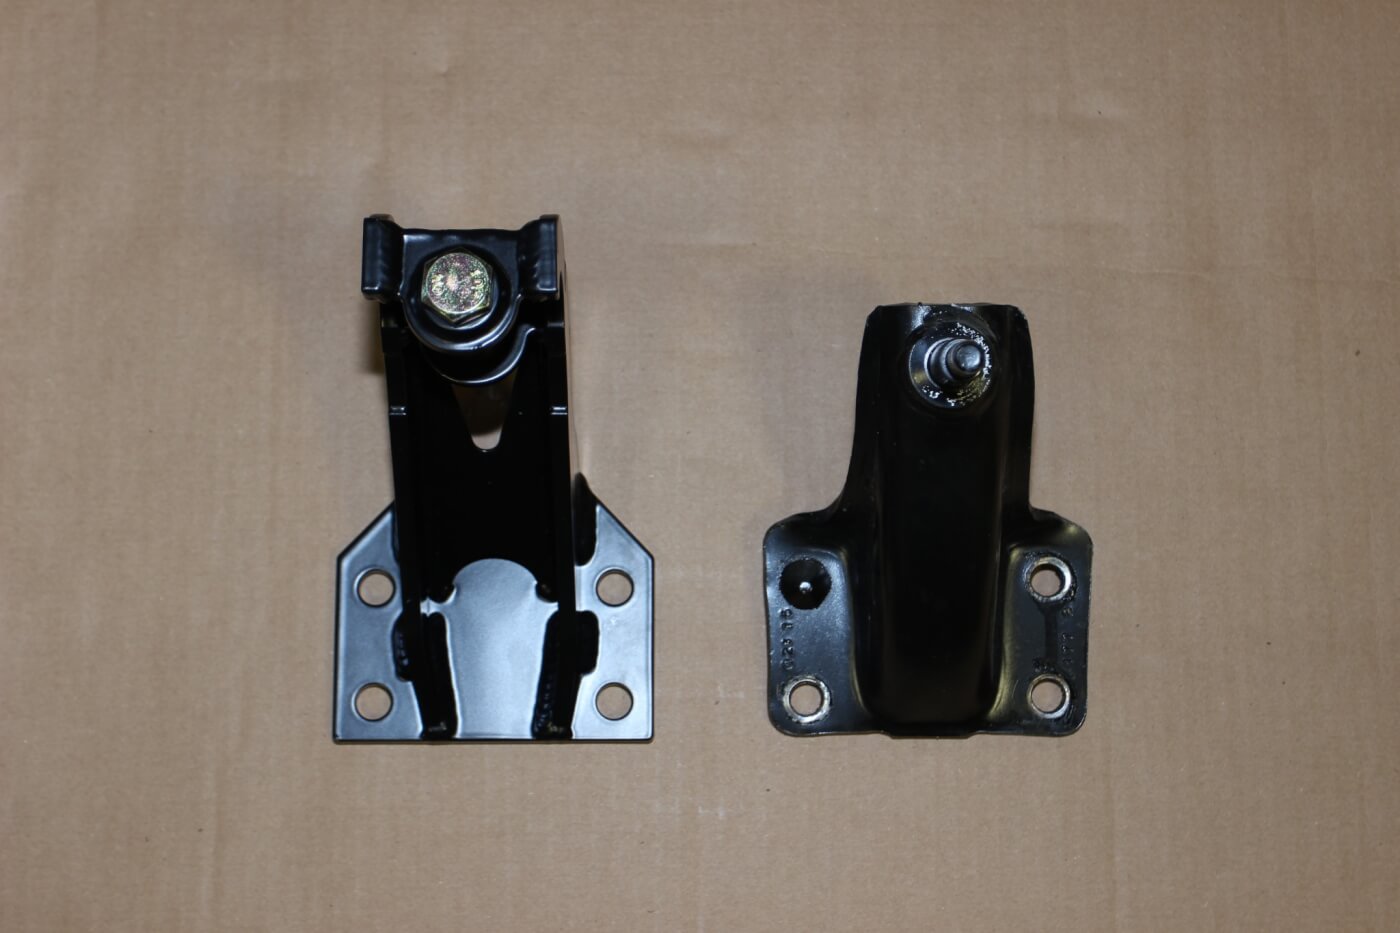 13. Here you see the new Carli rear shock mount (L) compared to the OEM mount. The OEM mount must be cut off the frame since it is riveted.